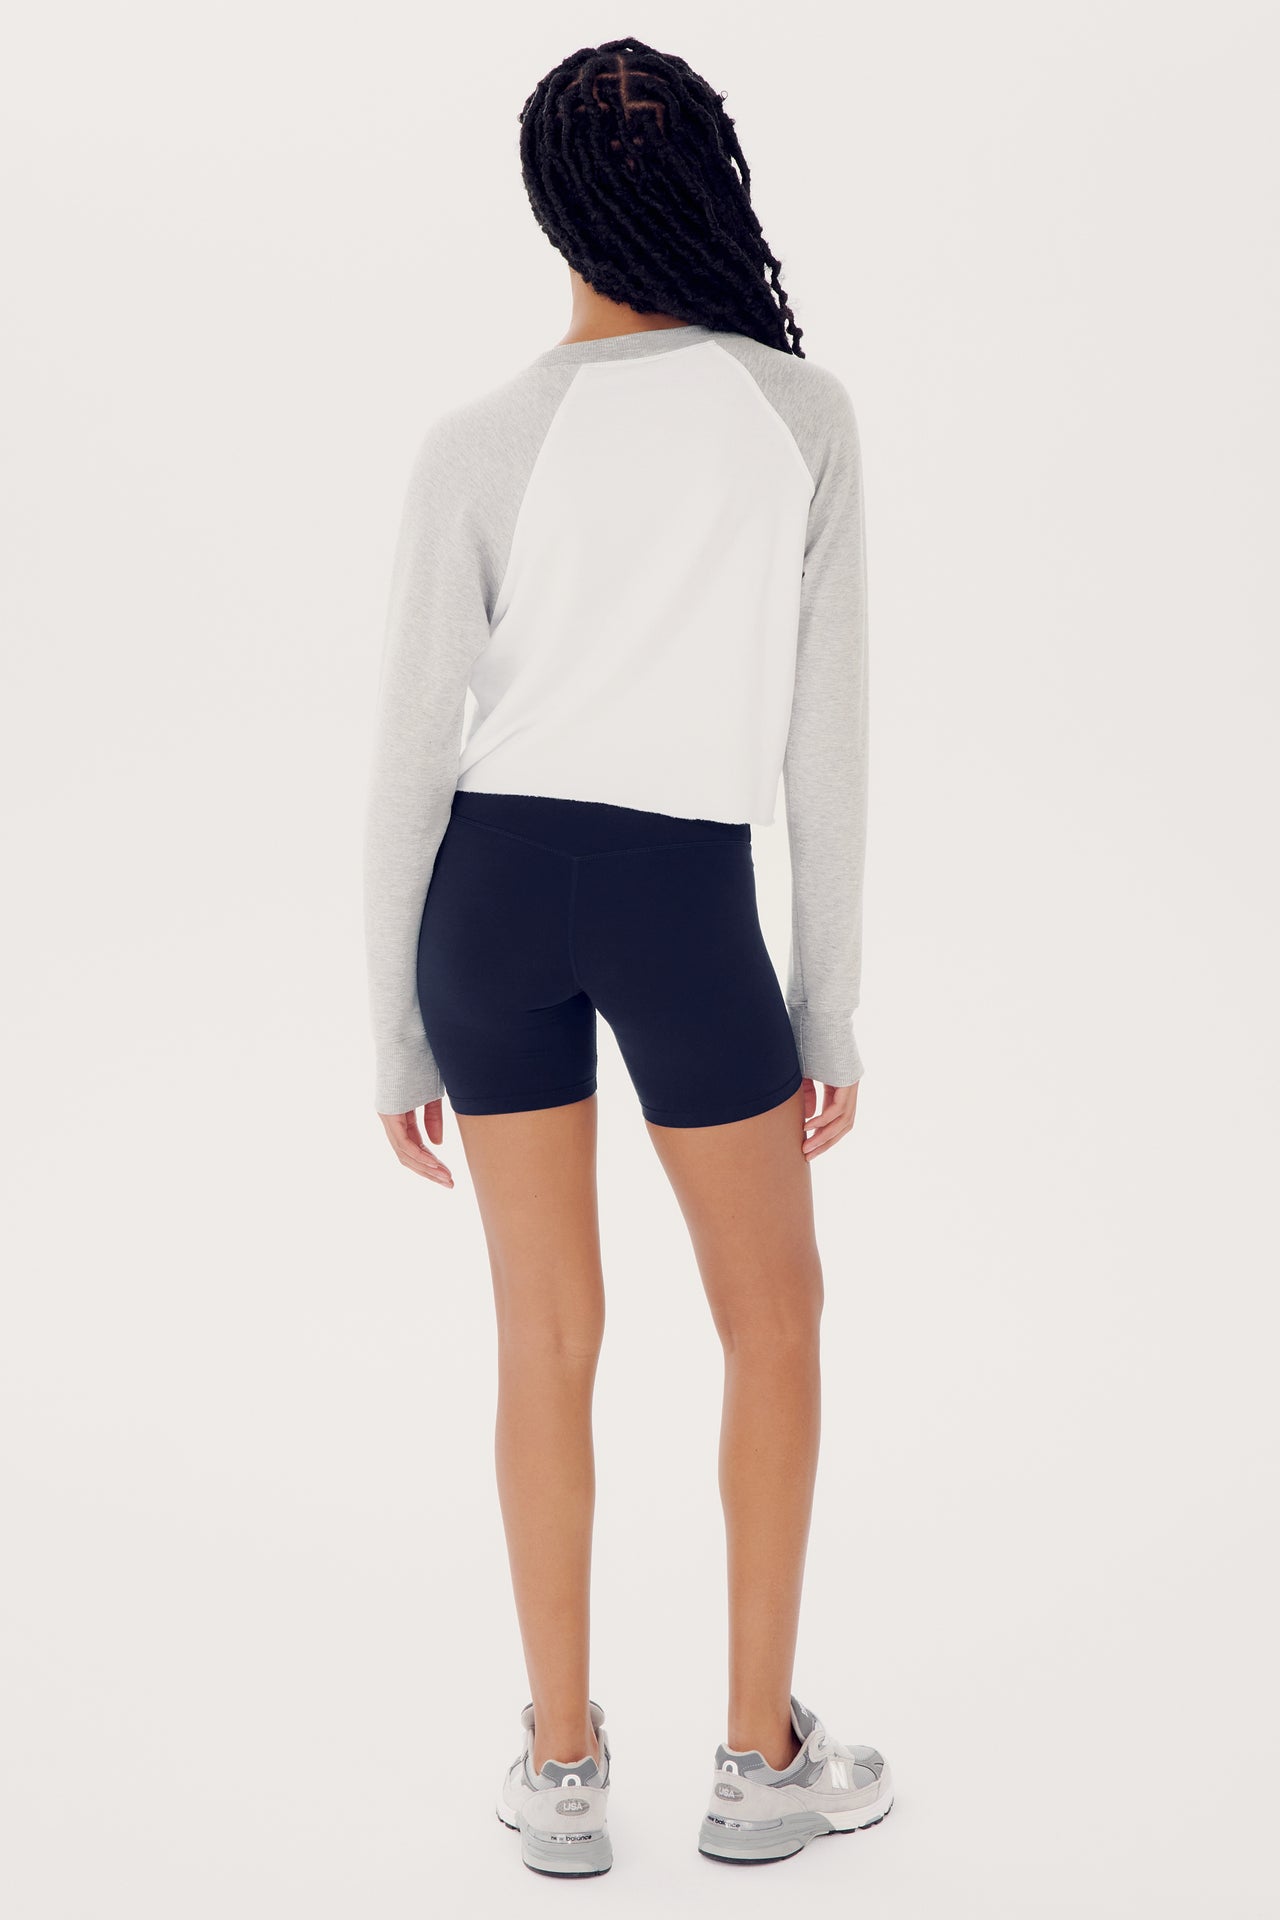 A woman standing with her back to the camera, wearing a SPLITS59 Warm Up Crop Fleece Sweatshirt in Heather Grey/White and navy blue spandex shorts, on a white background.